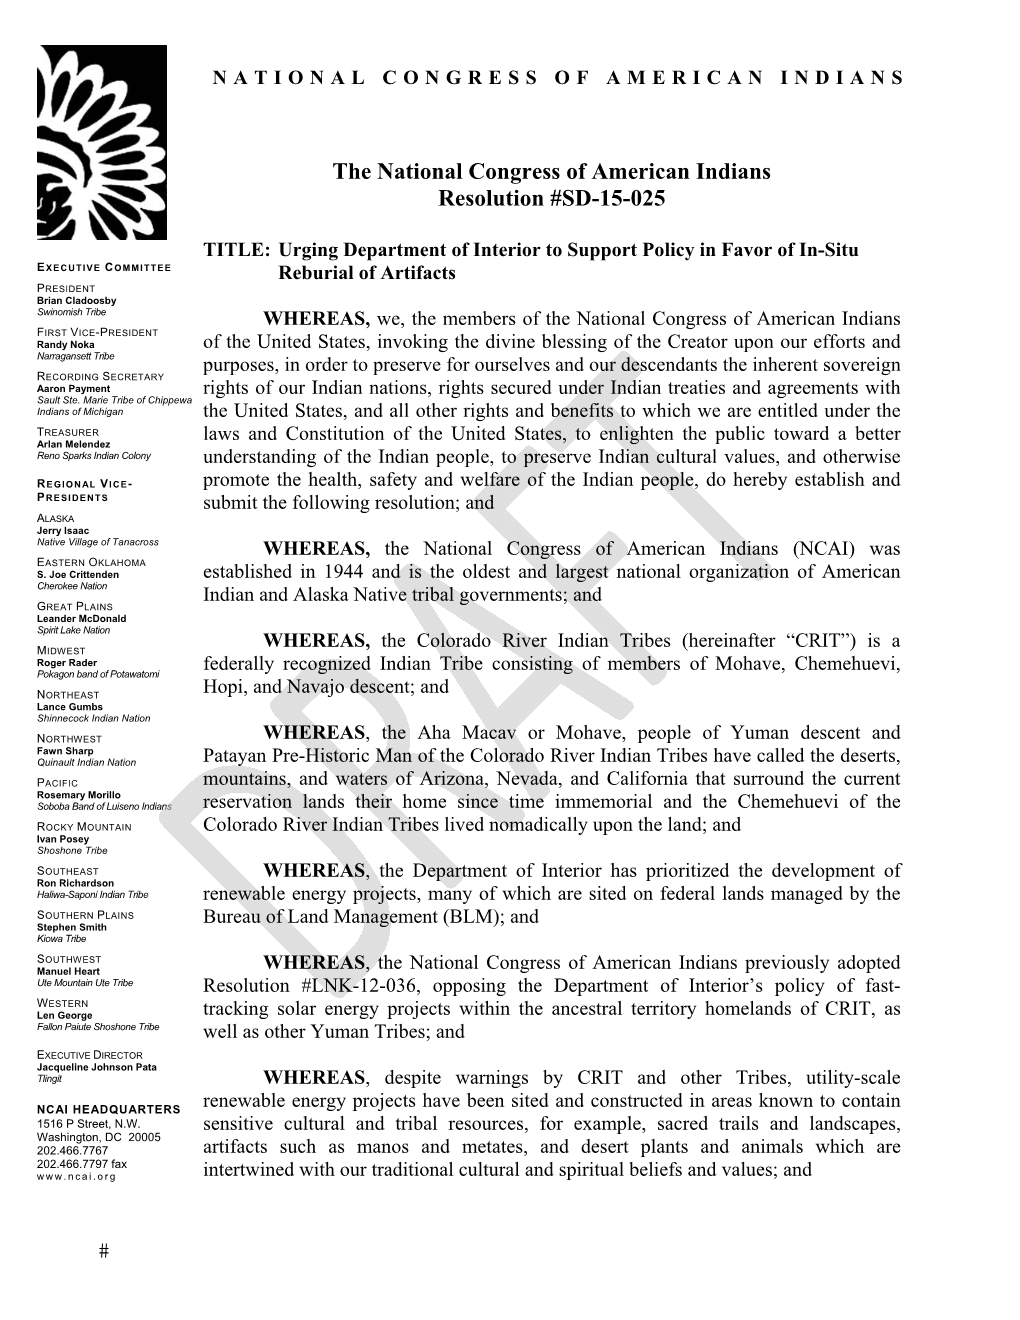 The National Congress of American Indians Resolution #SD-15-025